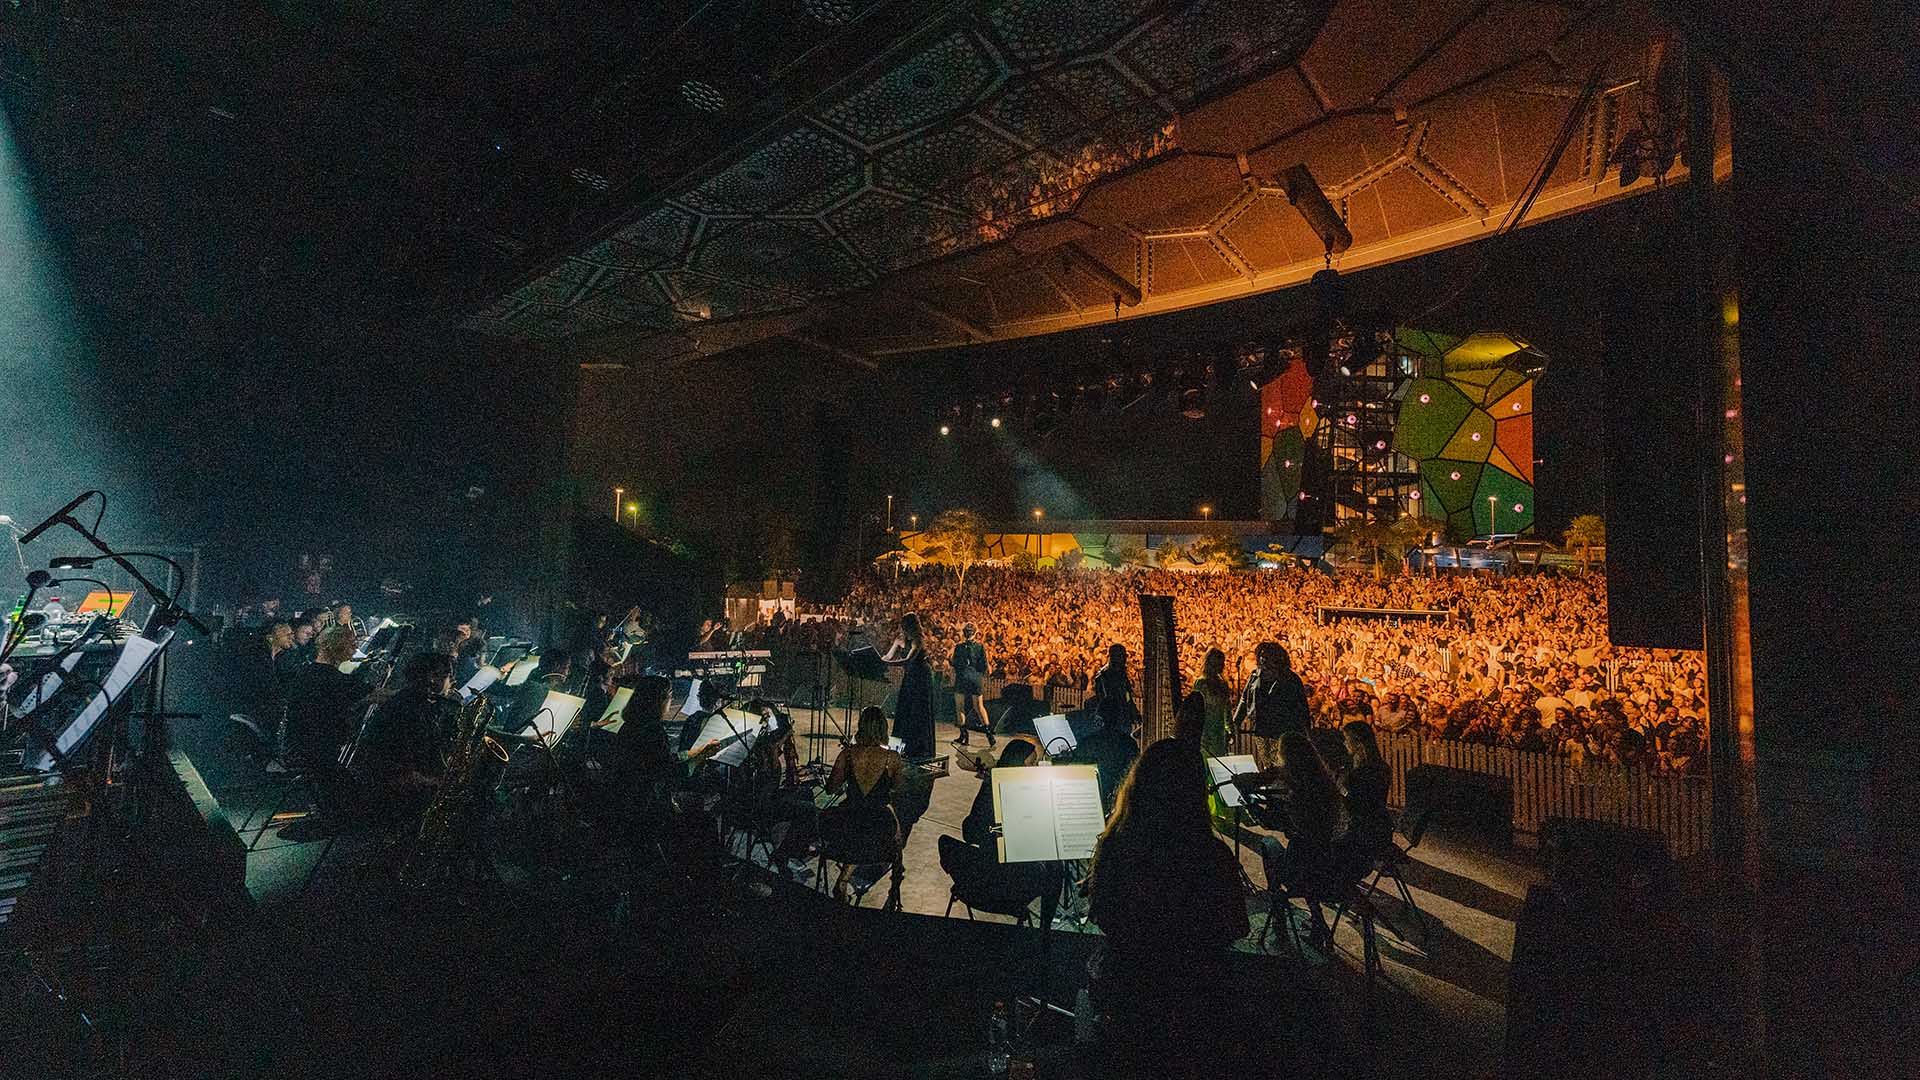 Ministry of Sound Is Hitting Riverstage with a Massive Orchestra Show Filled with Dance Music